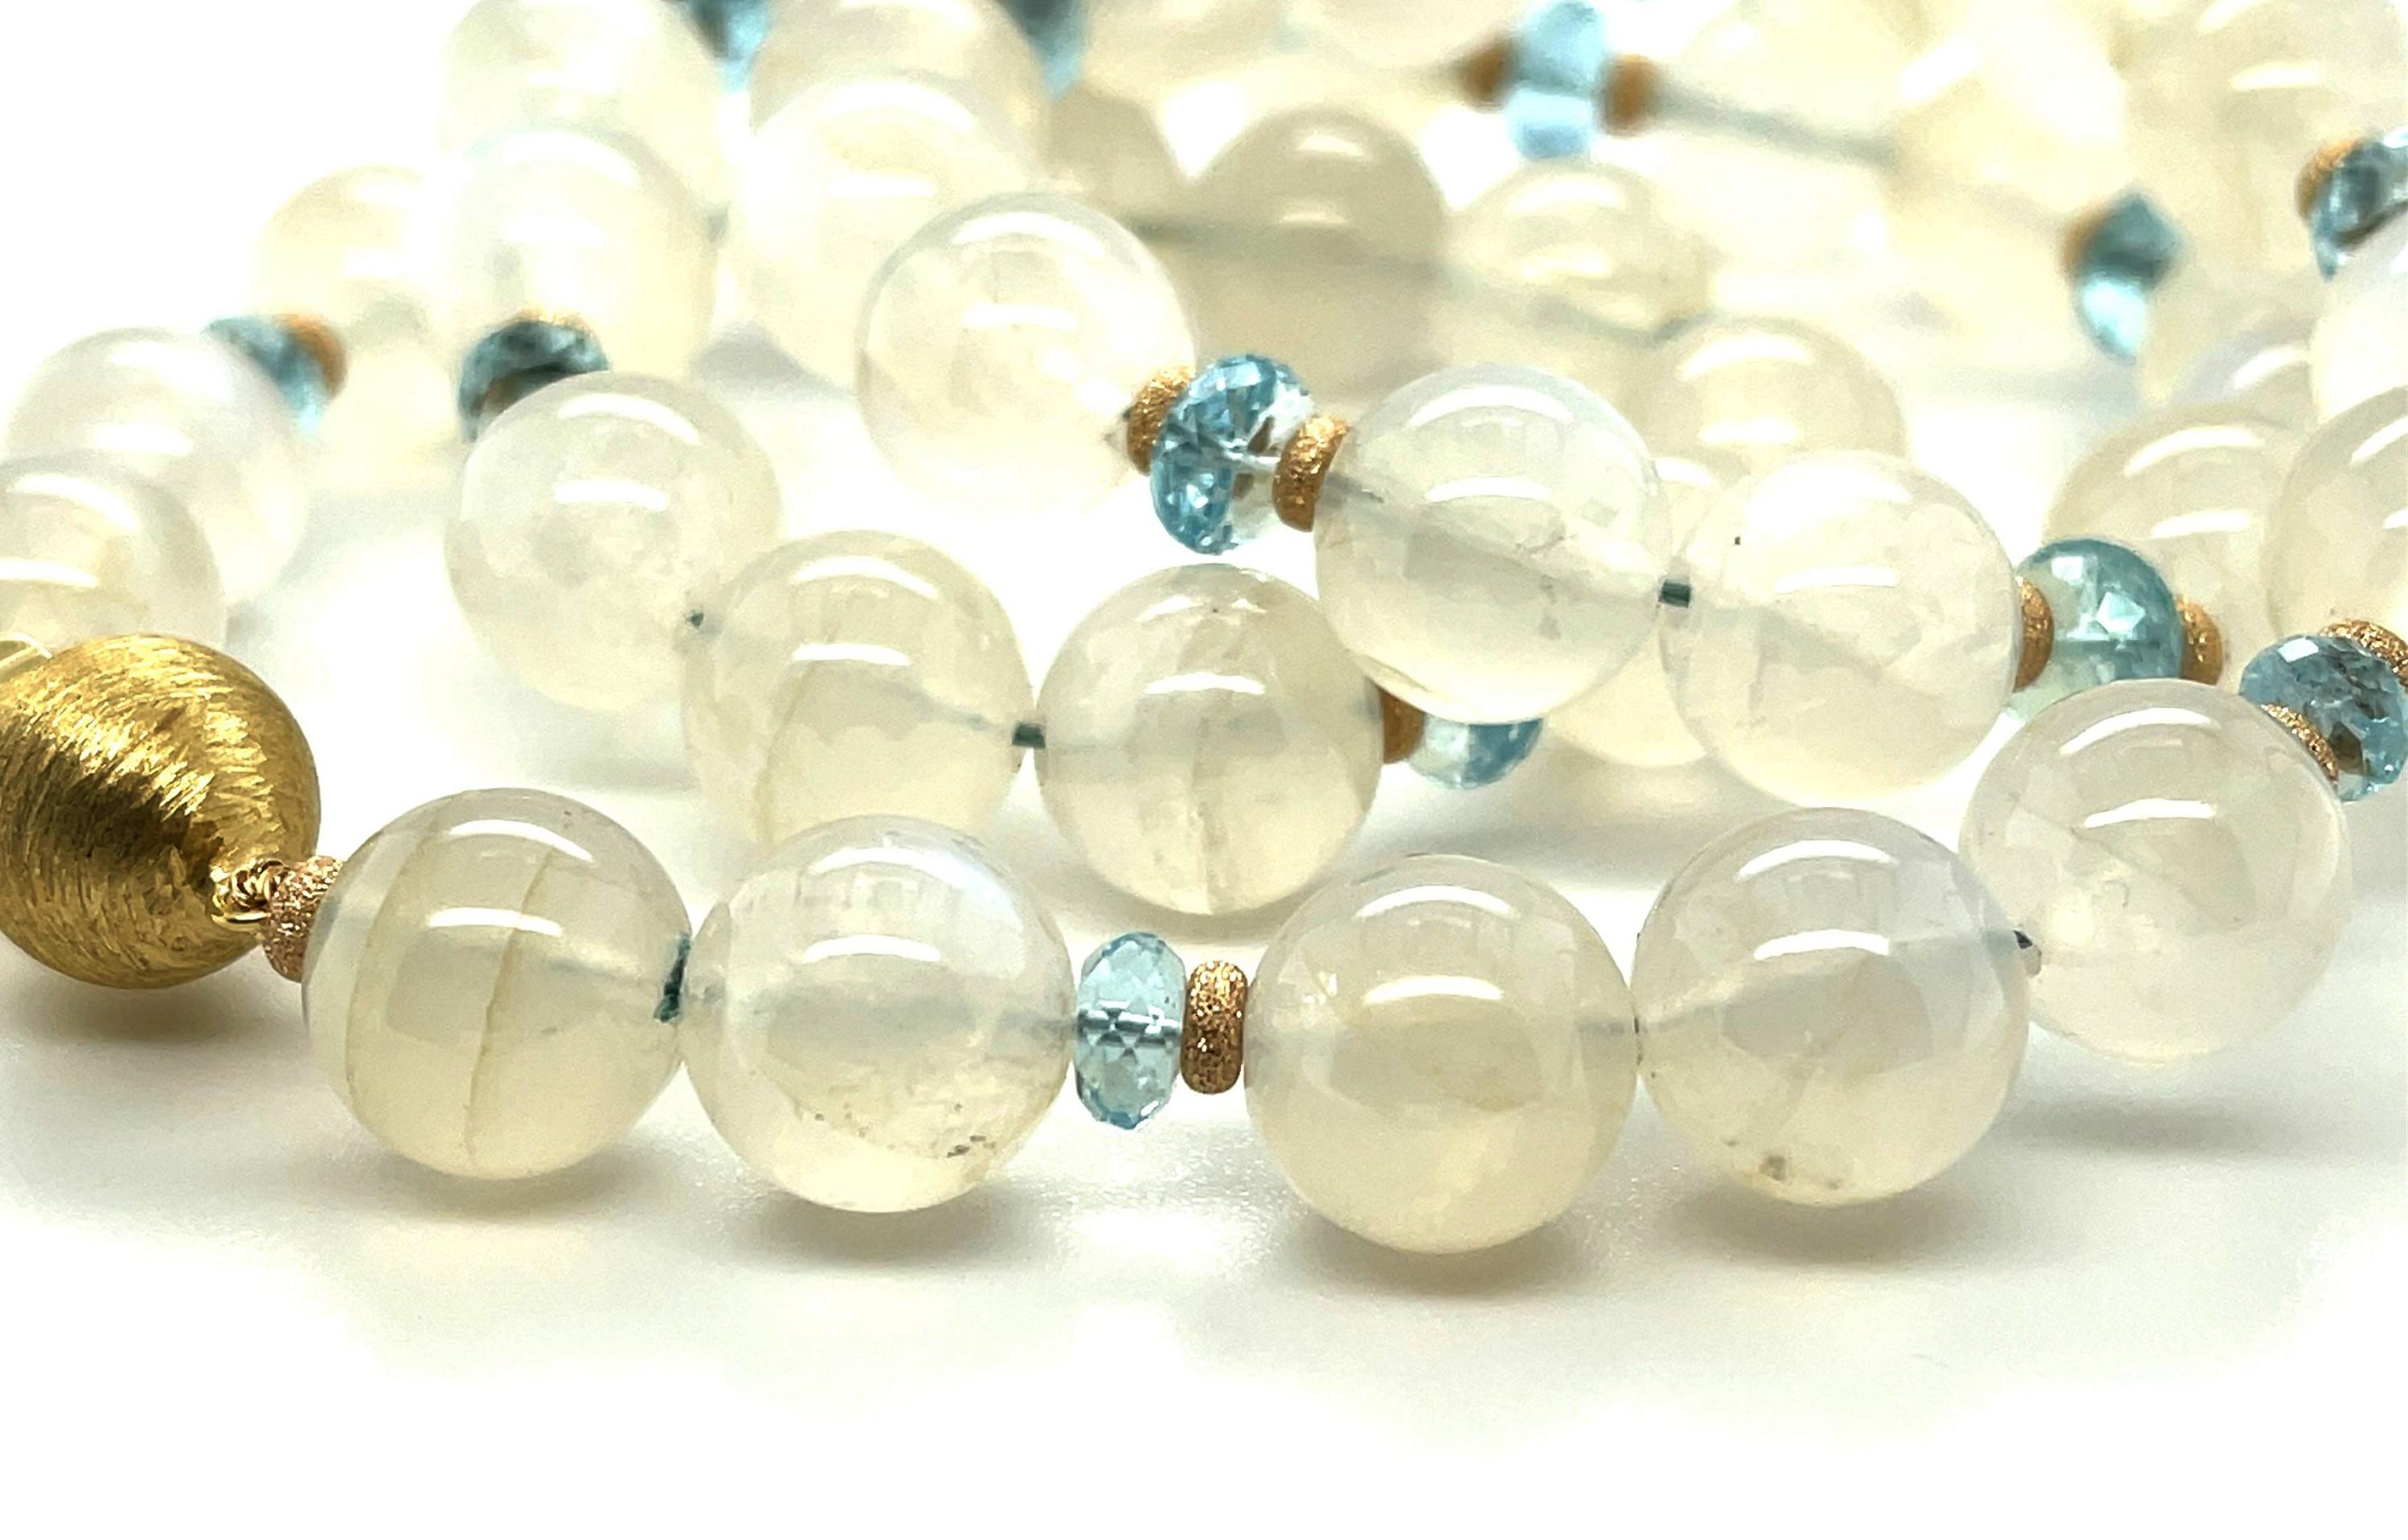 This gorgeous moonstone and faceted aquamarine beaded necklace is so elegant and versatile! Sparkling sky blue aquamarine beads bring out the lovely 